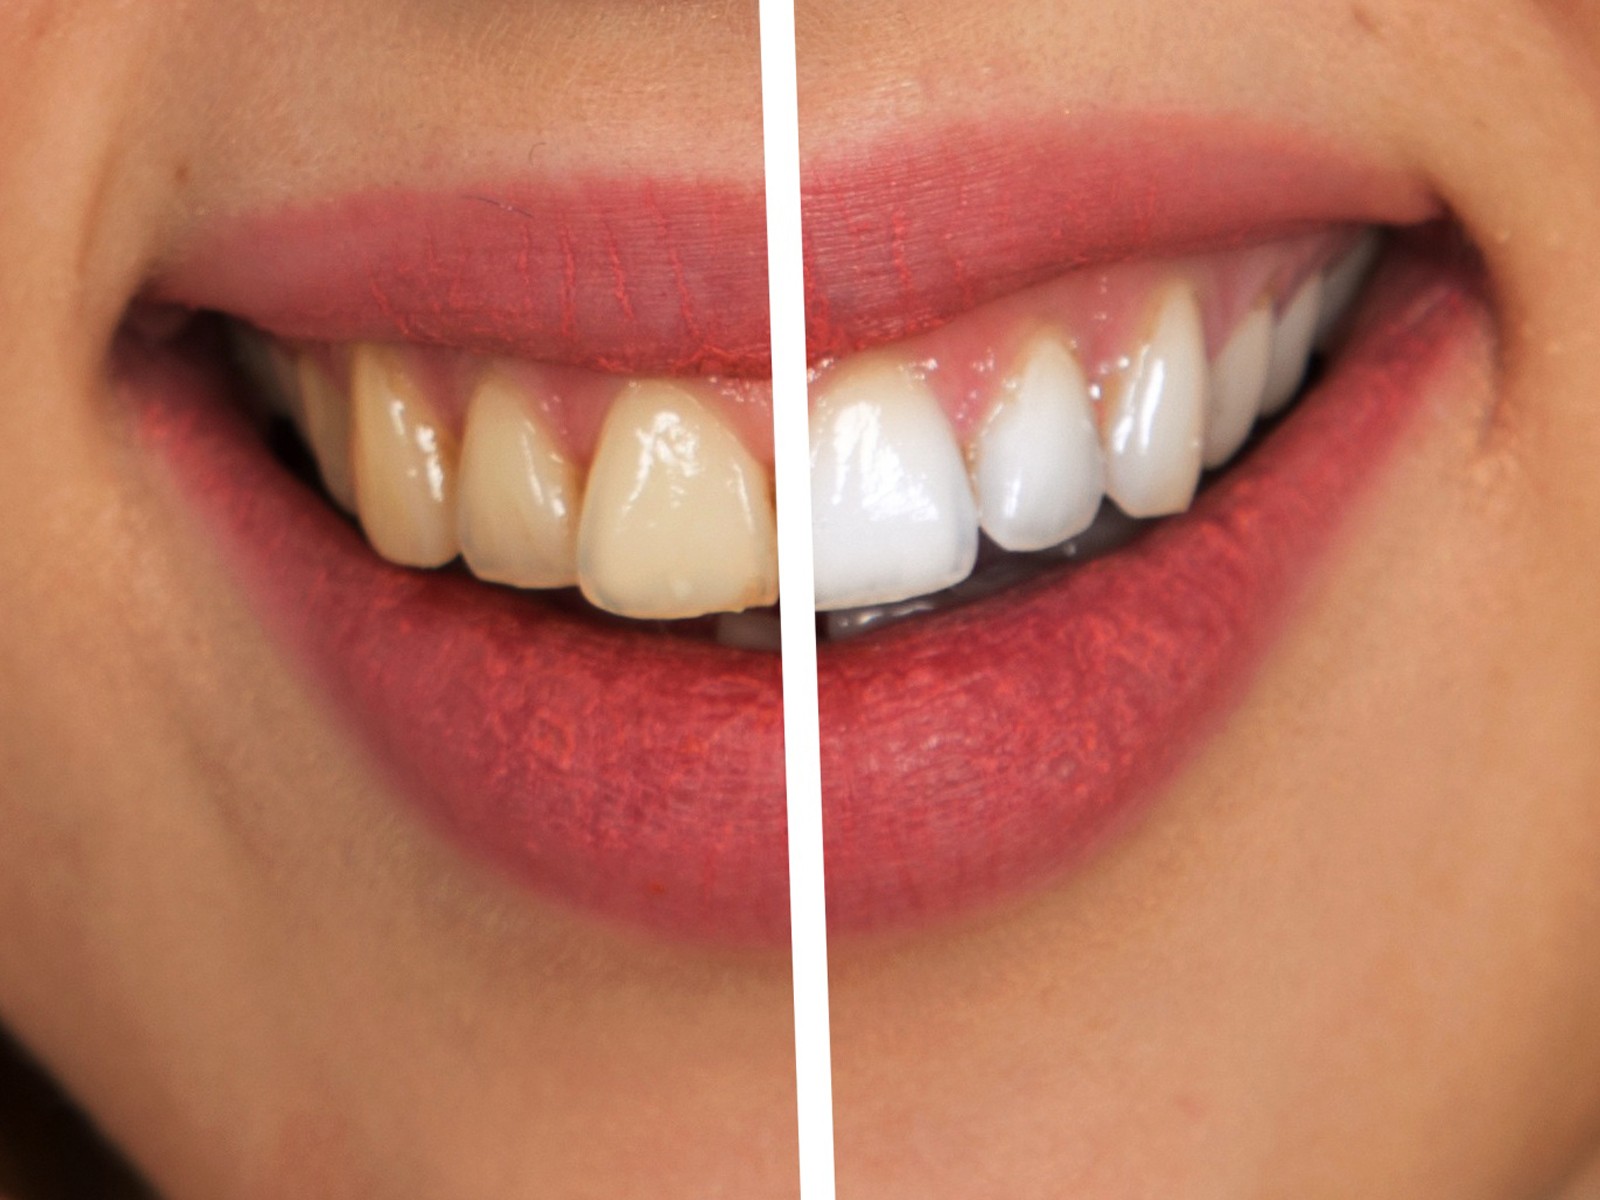 What You Can Do About the Color of Your Teeth?